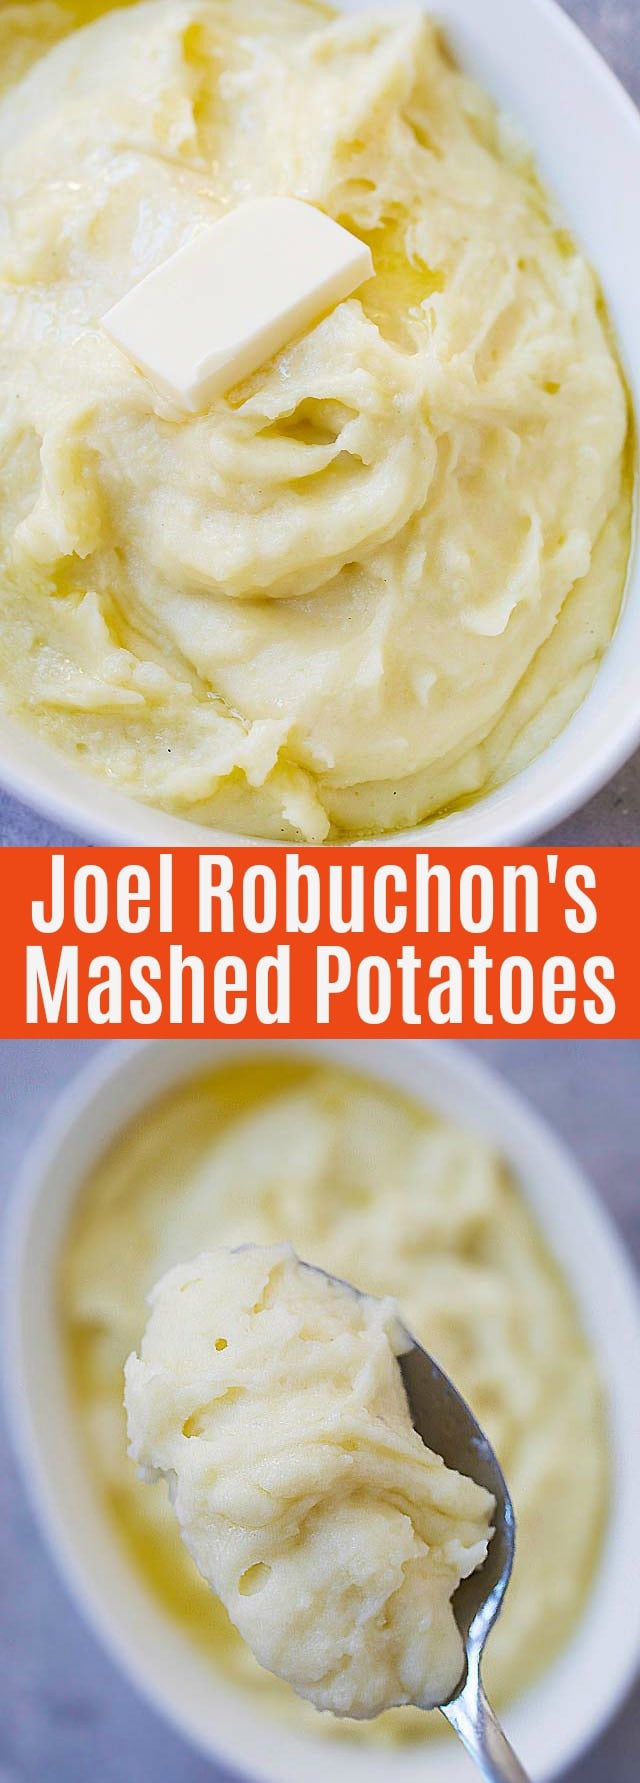 Joel Robuchon's Mashed Potatoes - the best mashed potatoes recipe in the whole world. Learn how to make perfect mashed potatoes,  complete with step-by-step picture guide.